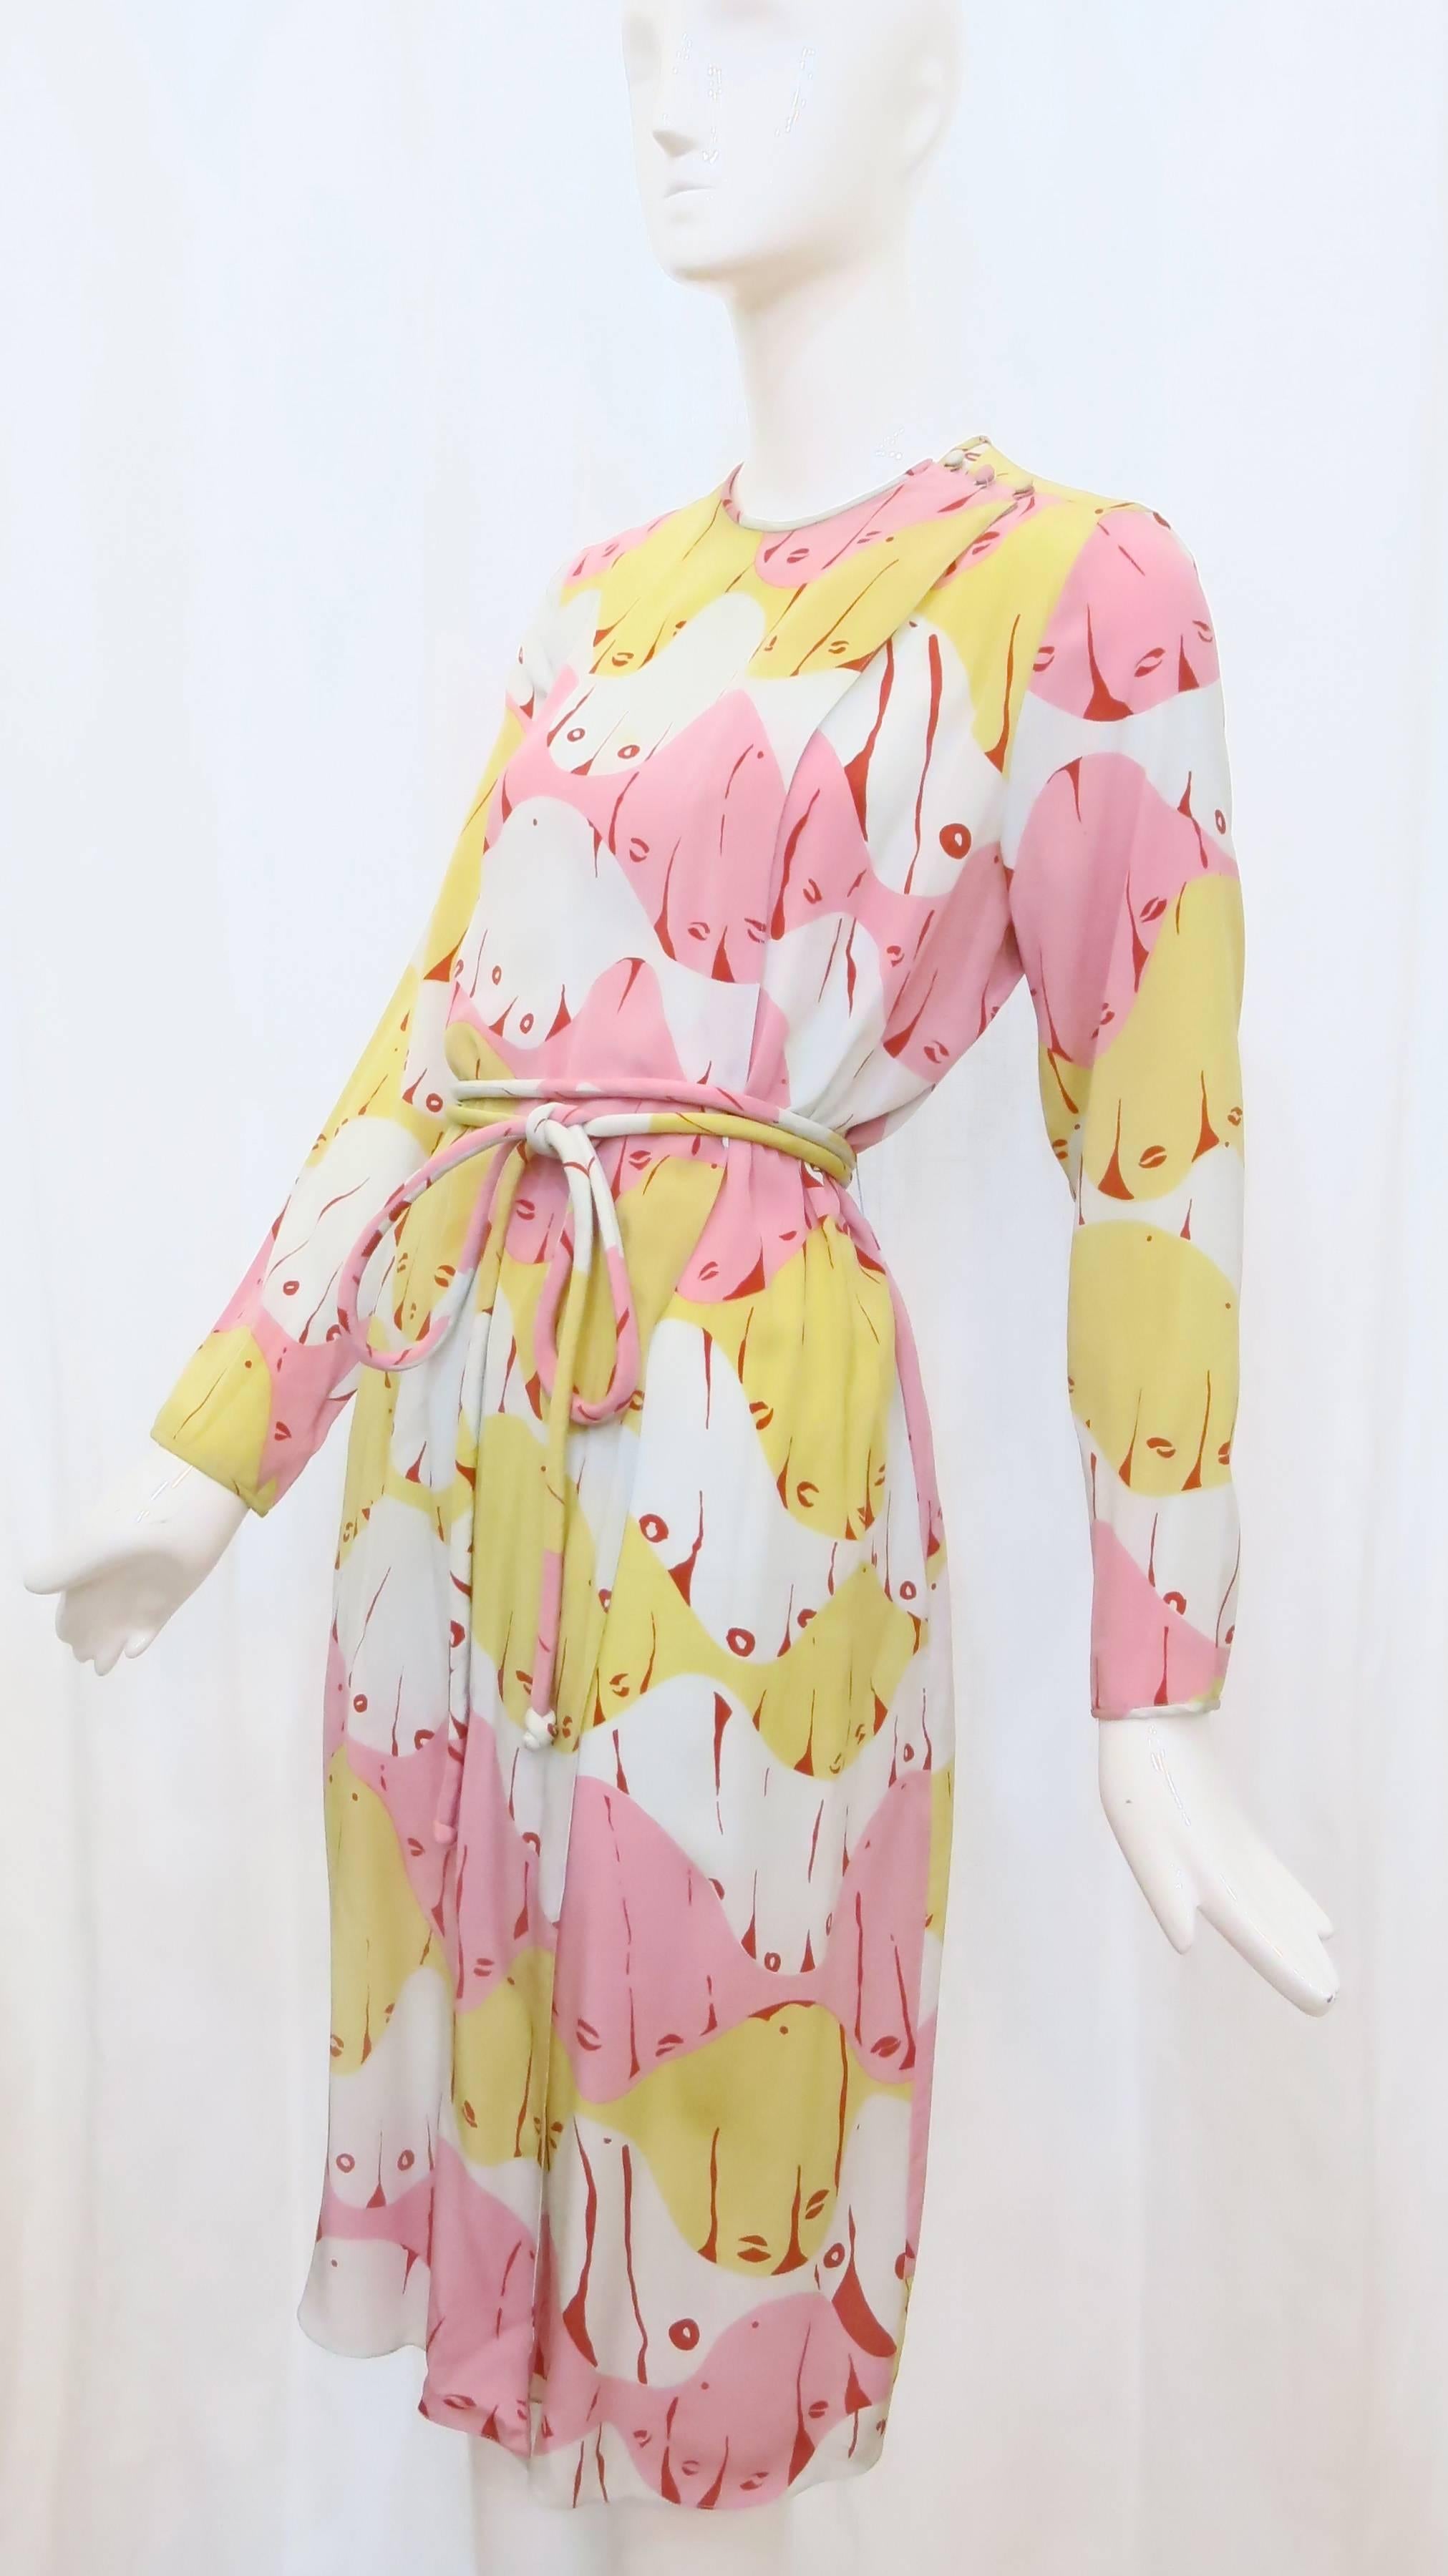 Bright and sensual, this silk wrap dress by Mary McFadden features an abstract print that looks like a multitude of faces. A long, tubular matching belt adds to the softness and fluidity of this dress. The dress opens up like a robe and snaps inside